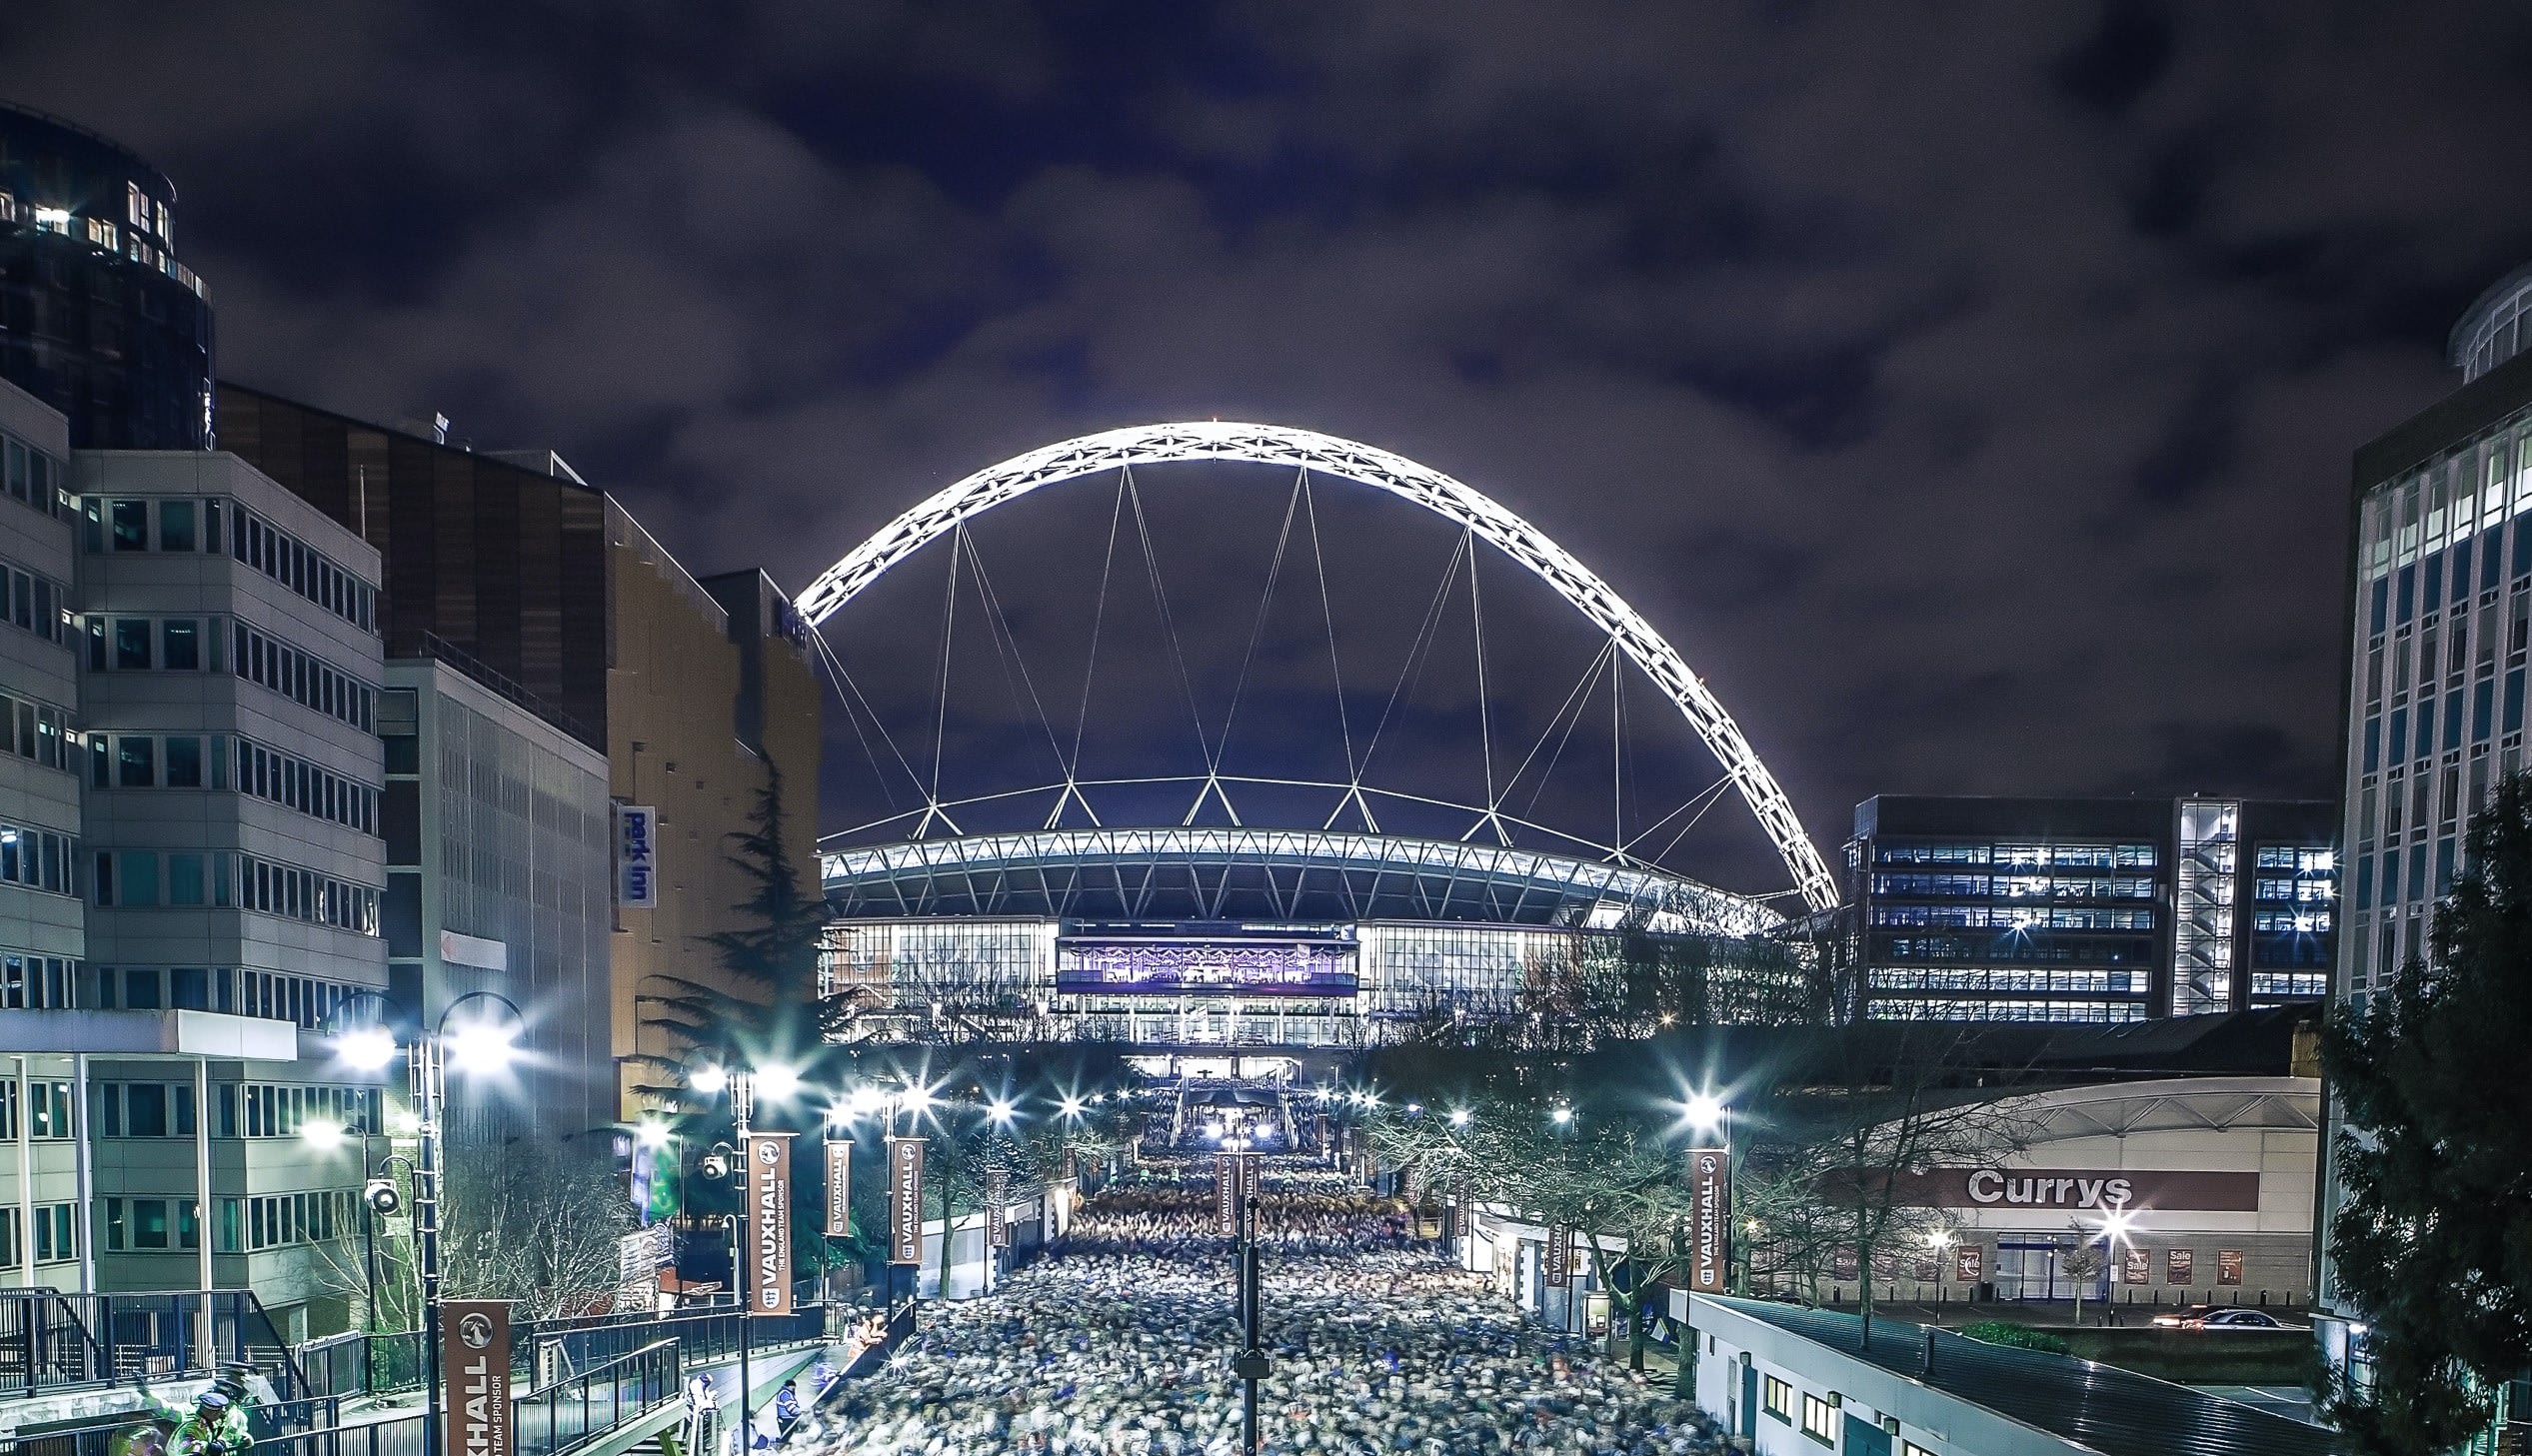 80,000 People leave Wembley Stadium after the match between England and Brazil.You can also see Sirius just above the stadium’s arch